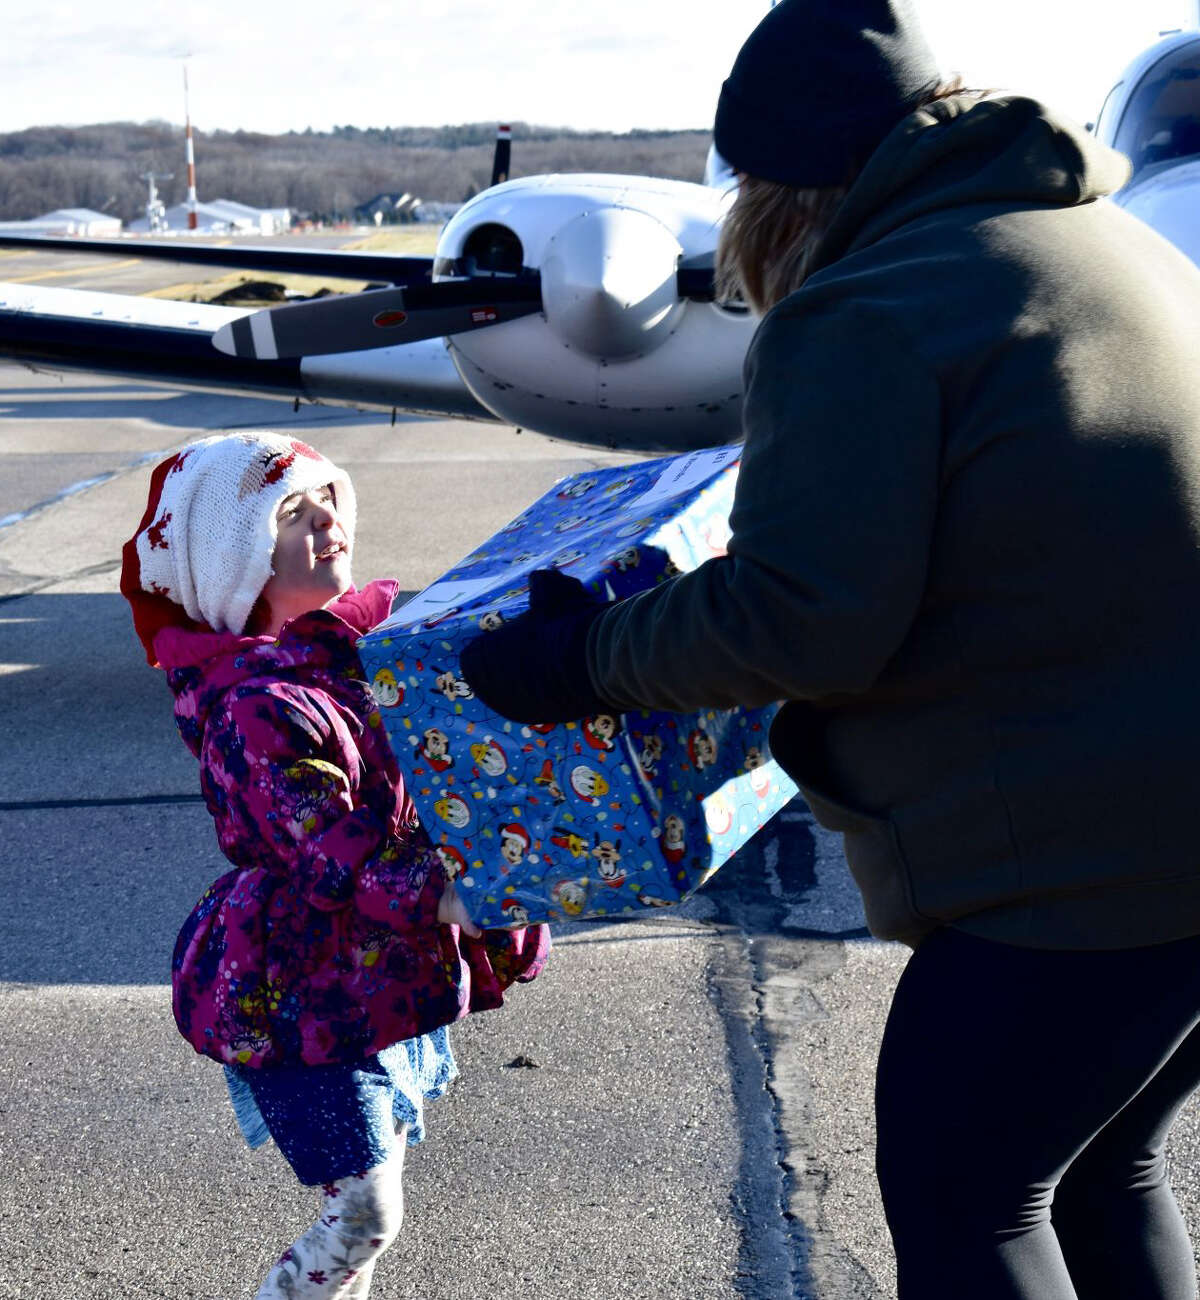 Volunteers spent Saturday morning unloading several gifts from planes at the Roben-Hood Airport in Big Rapids for this year's Operation Good Cheer. 